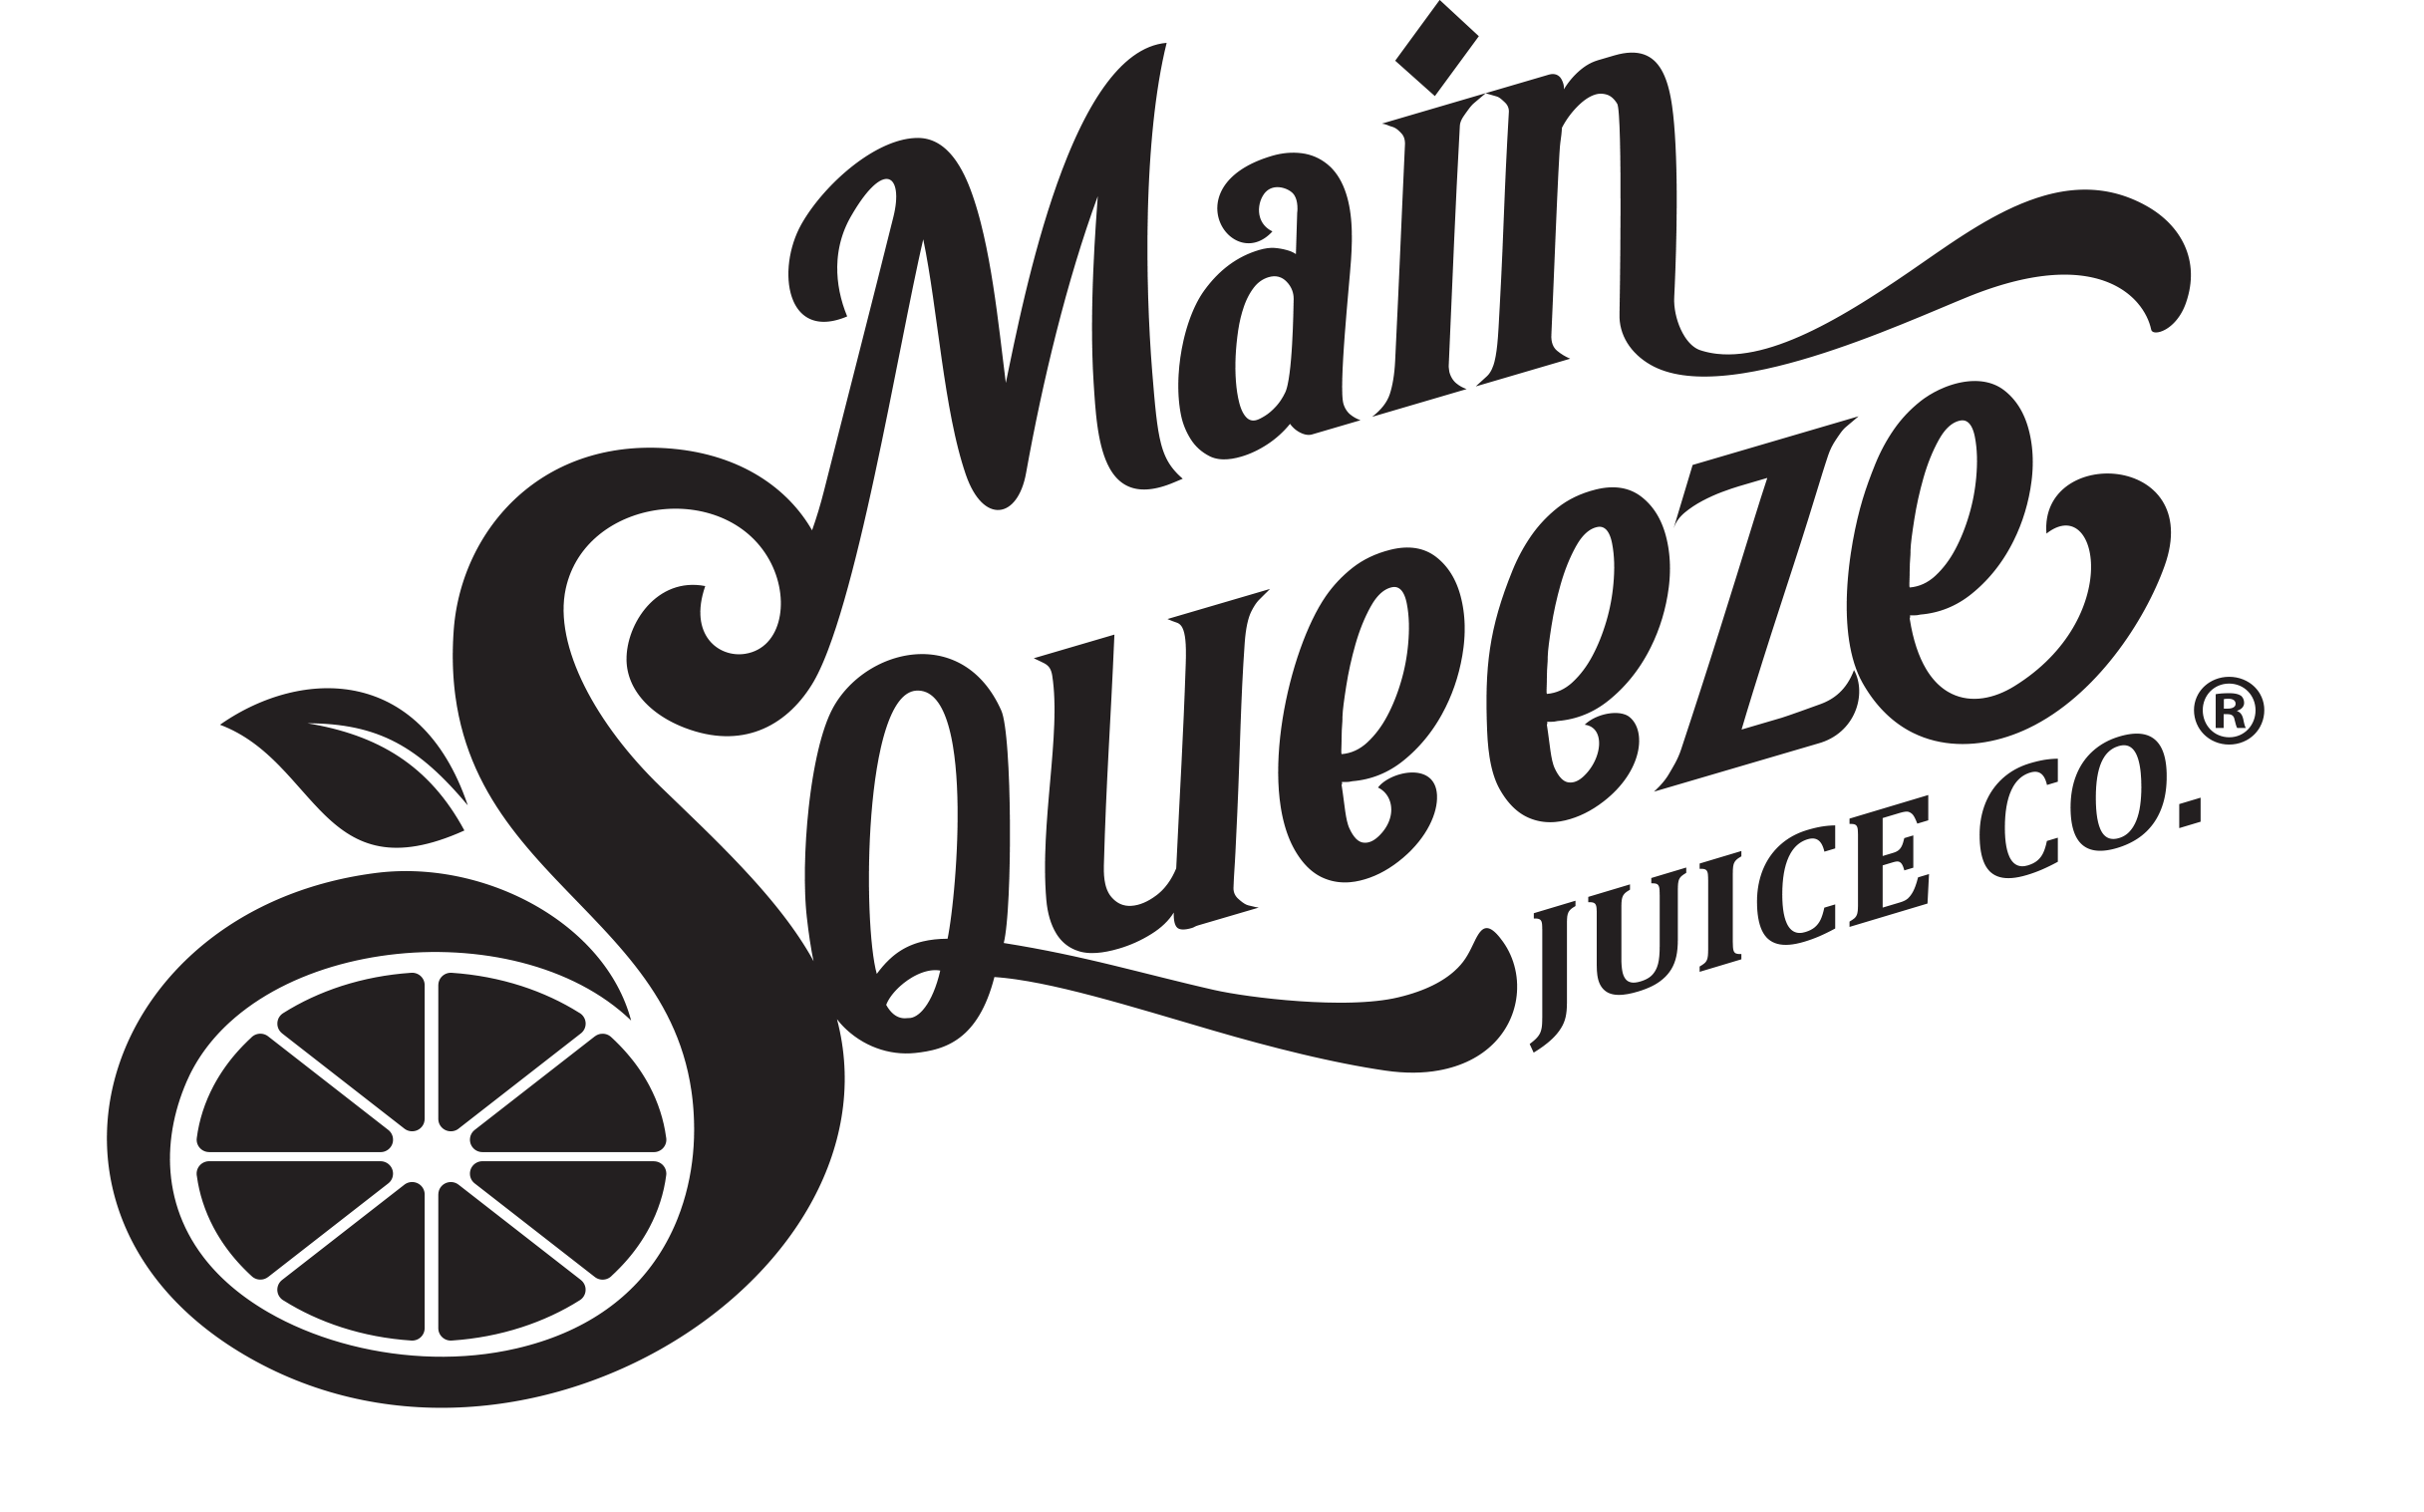 Mainsqueezejuiceco Franchise